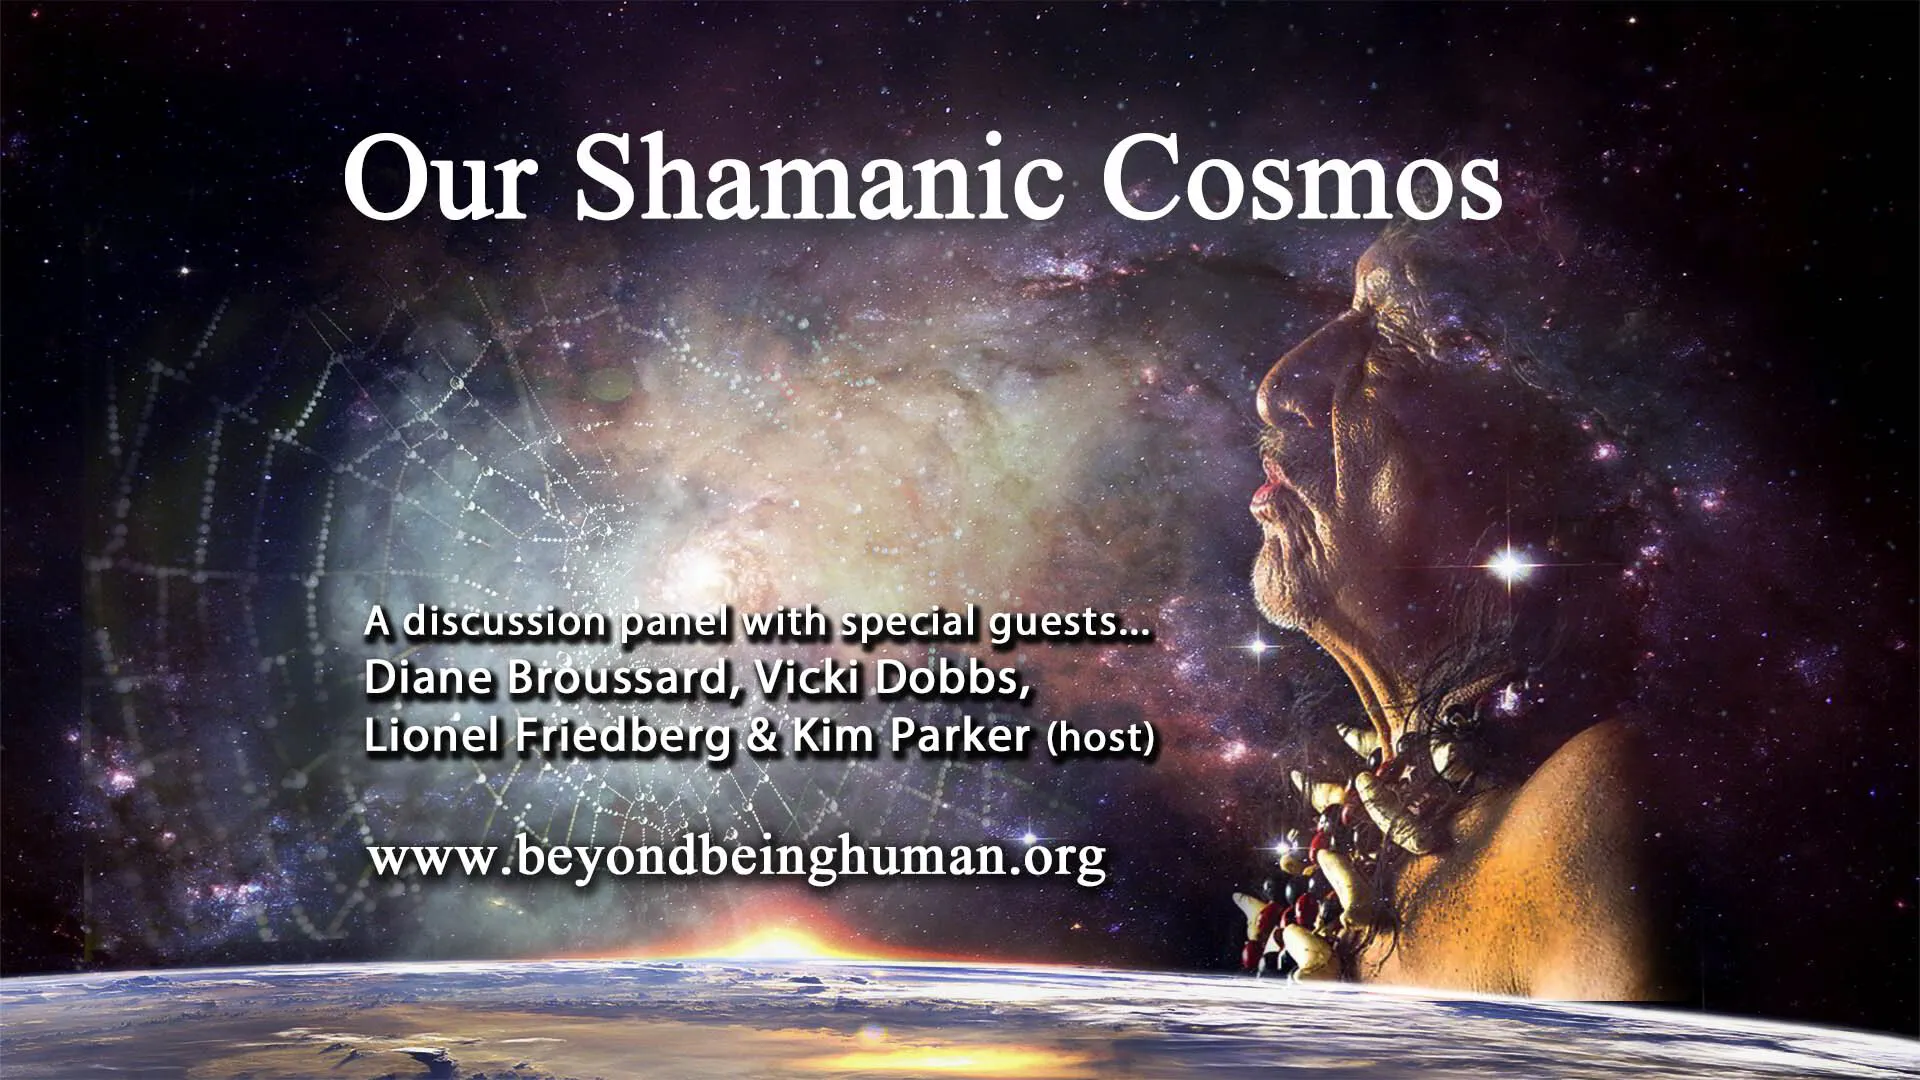 Our Shamanic Cosmos